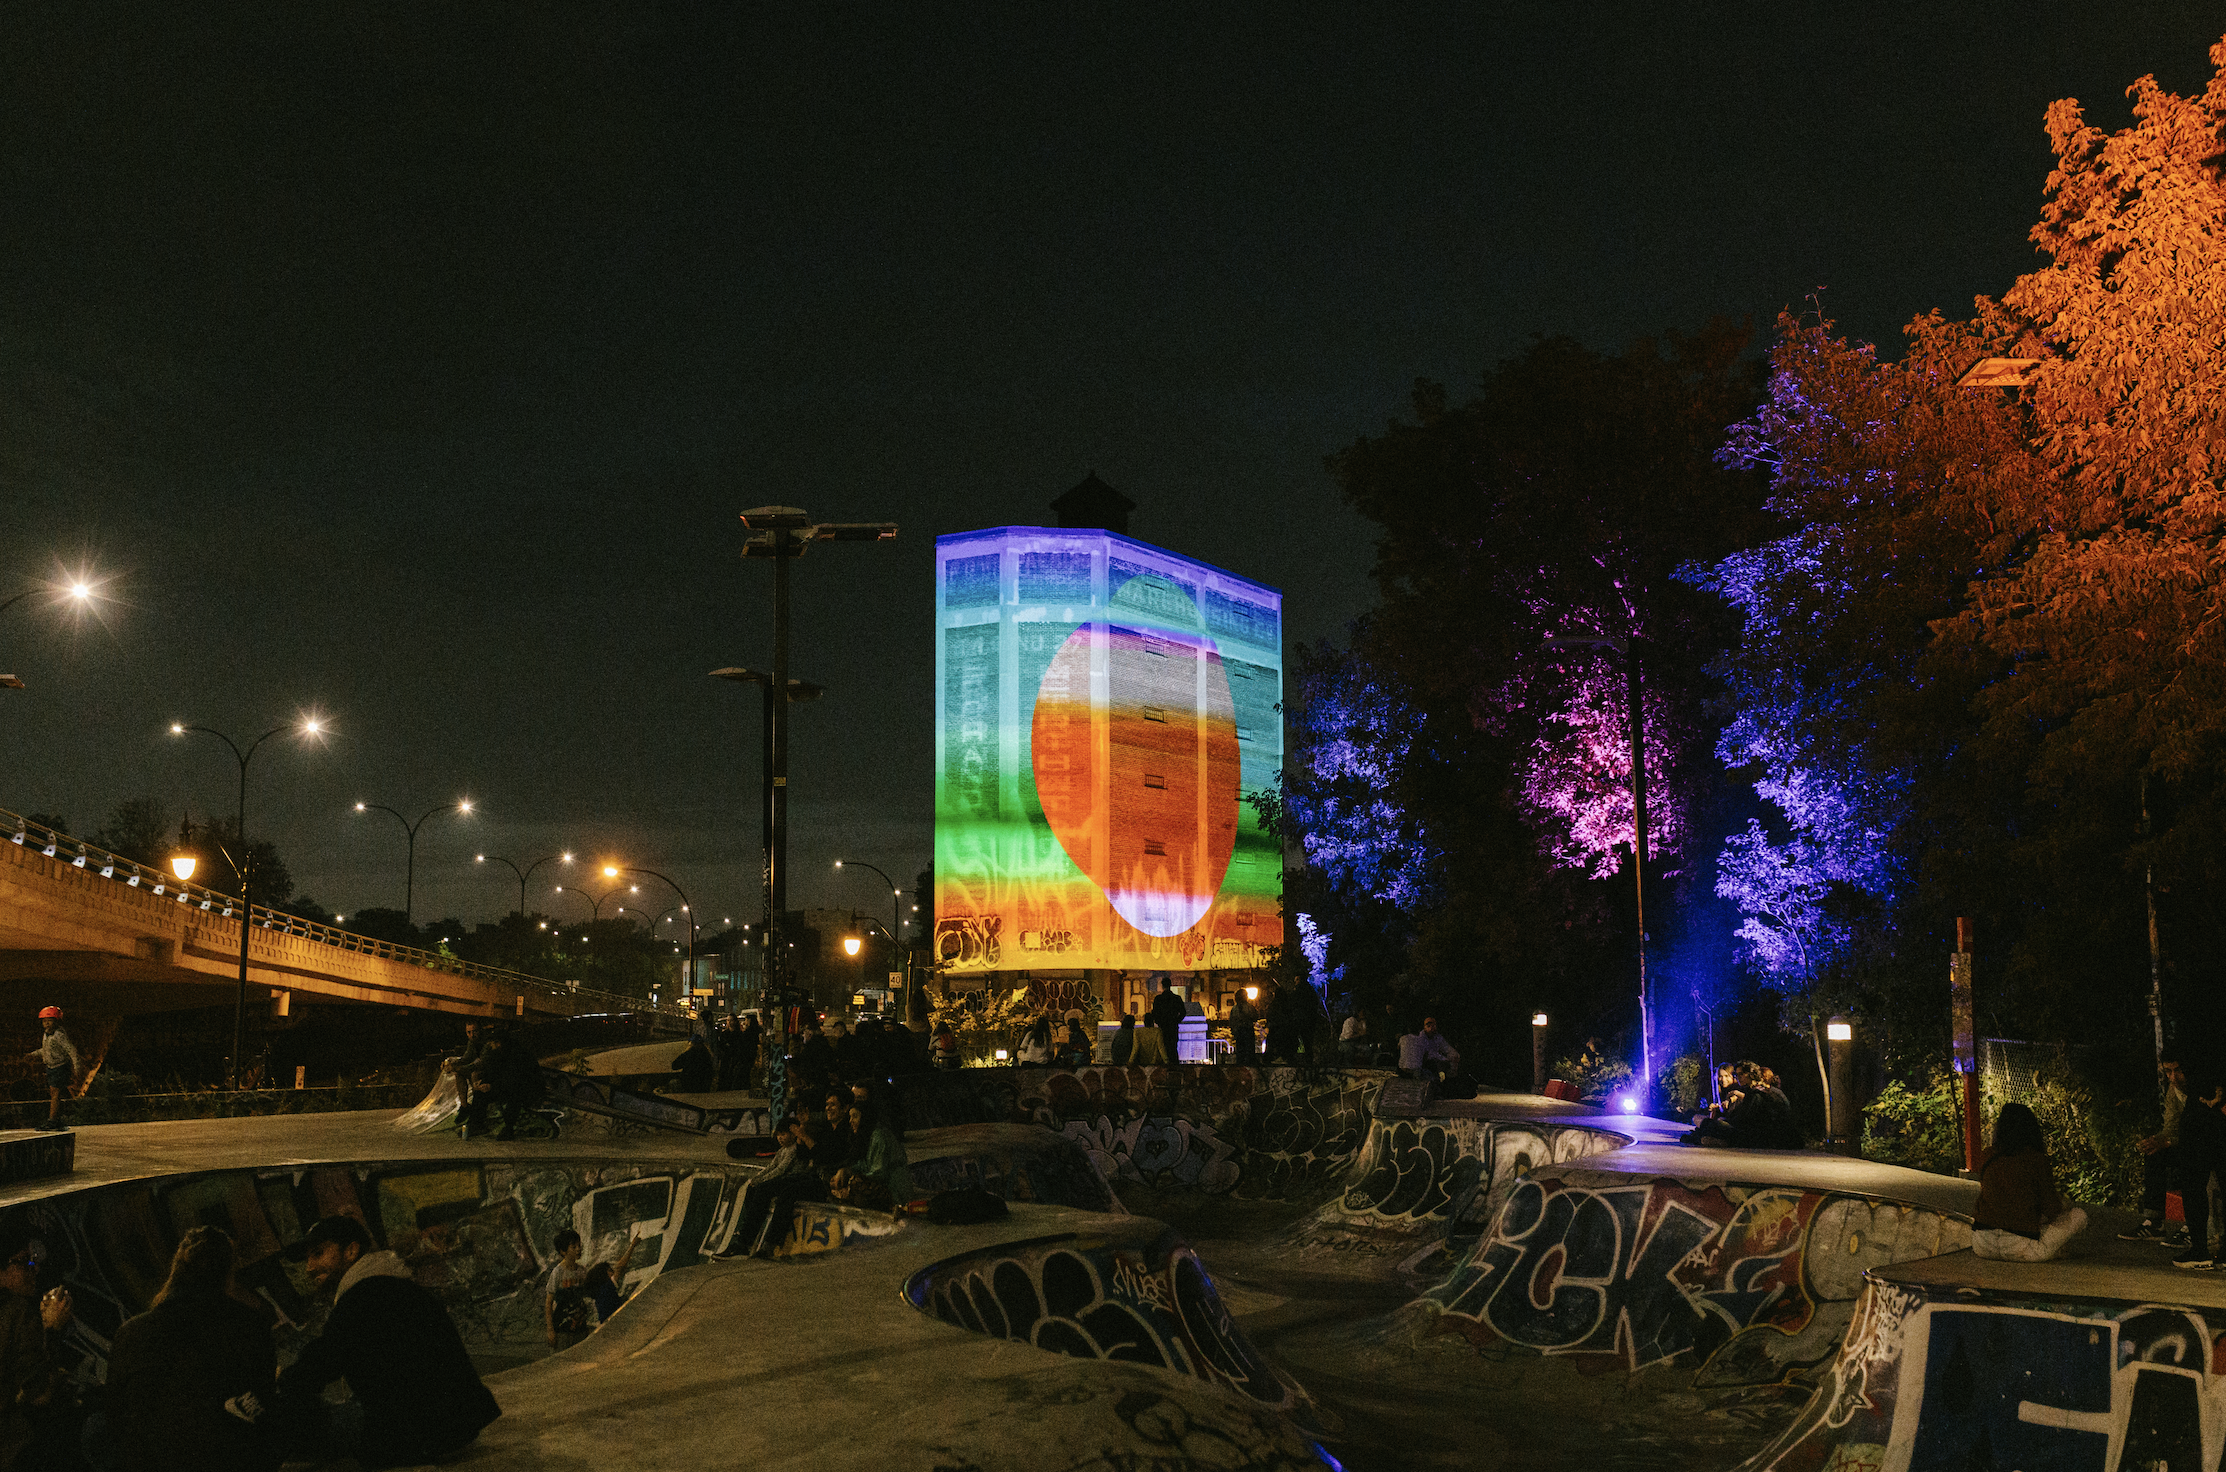 Projection mapping projects